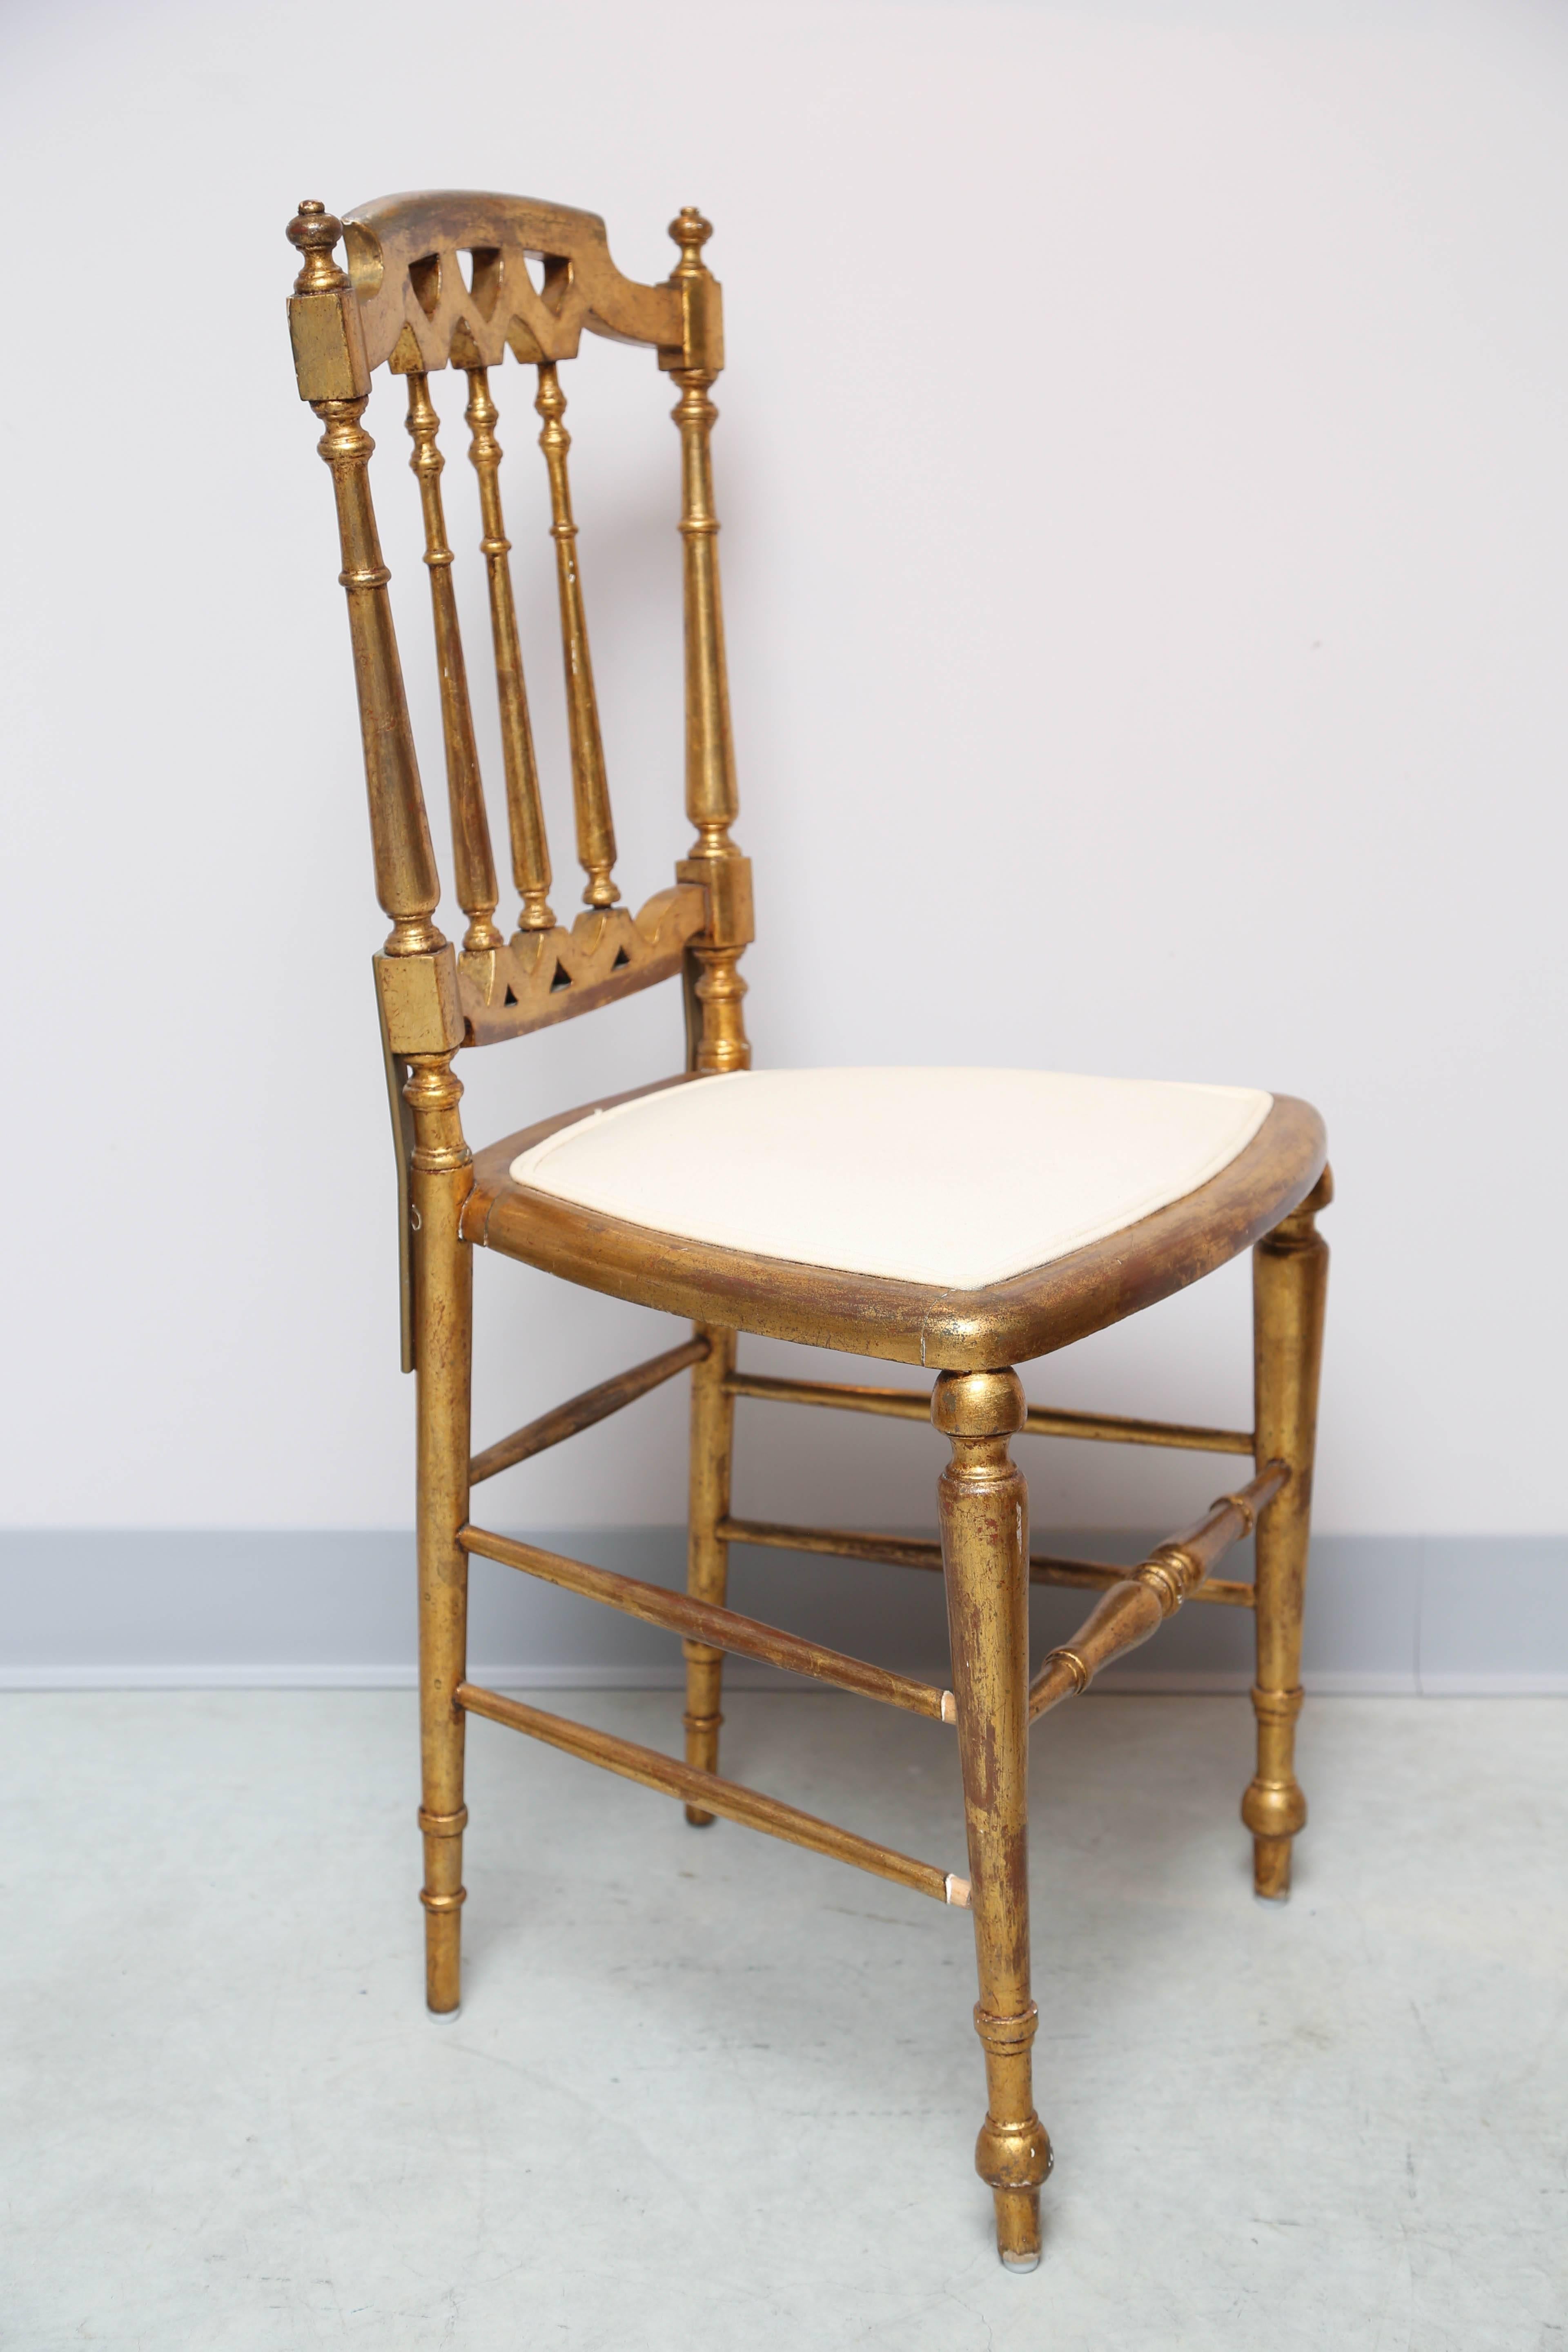 French Pair of Chiavari Chairs, Palm Beach, Giltwood, Elegant, for Use or Accessory